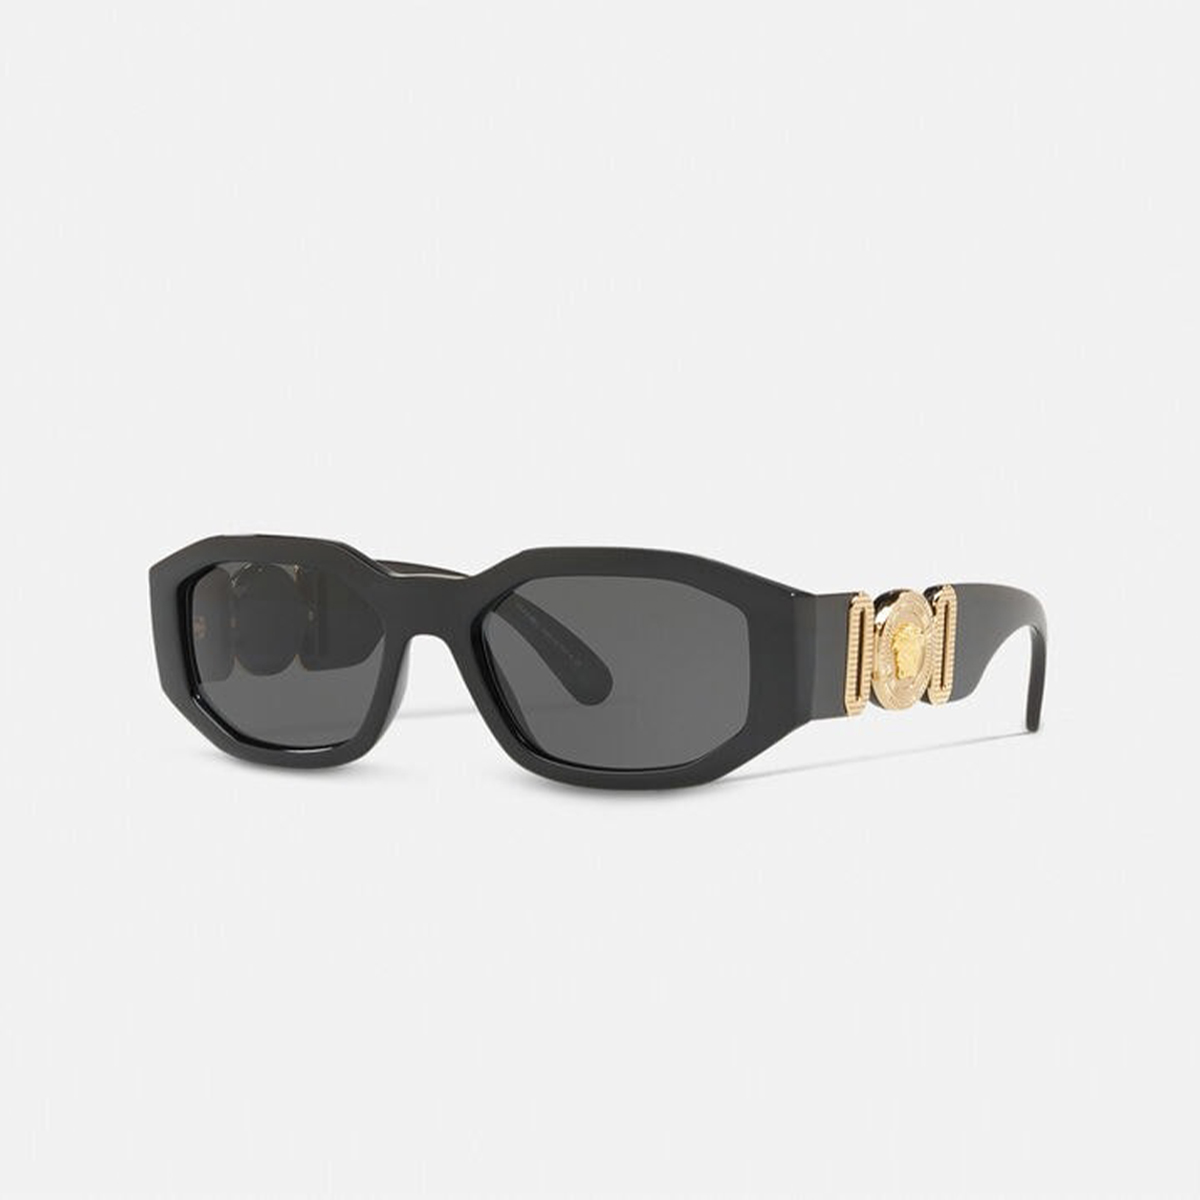 Versace's Latest Eyewear Collection for Summer | Who What Wear